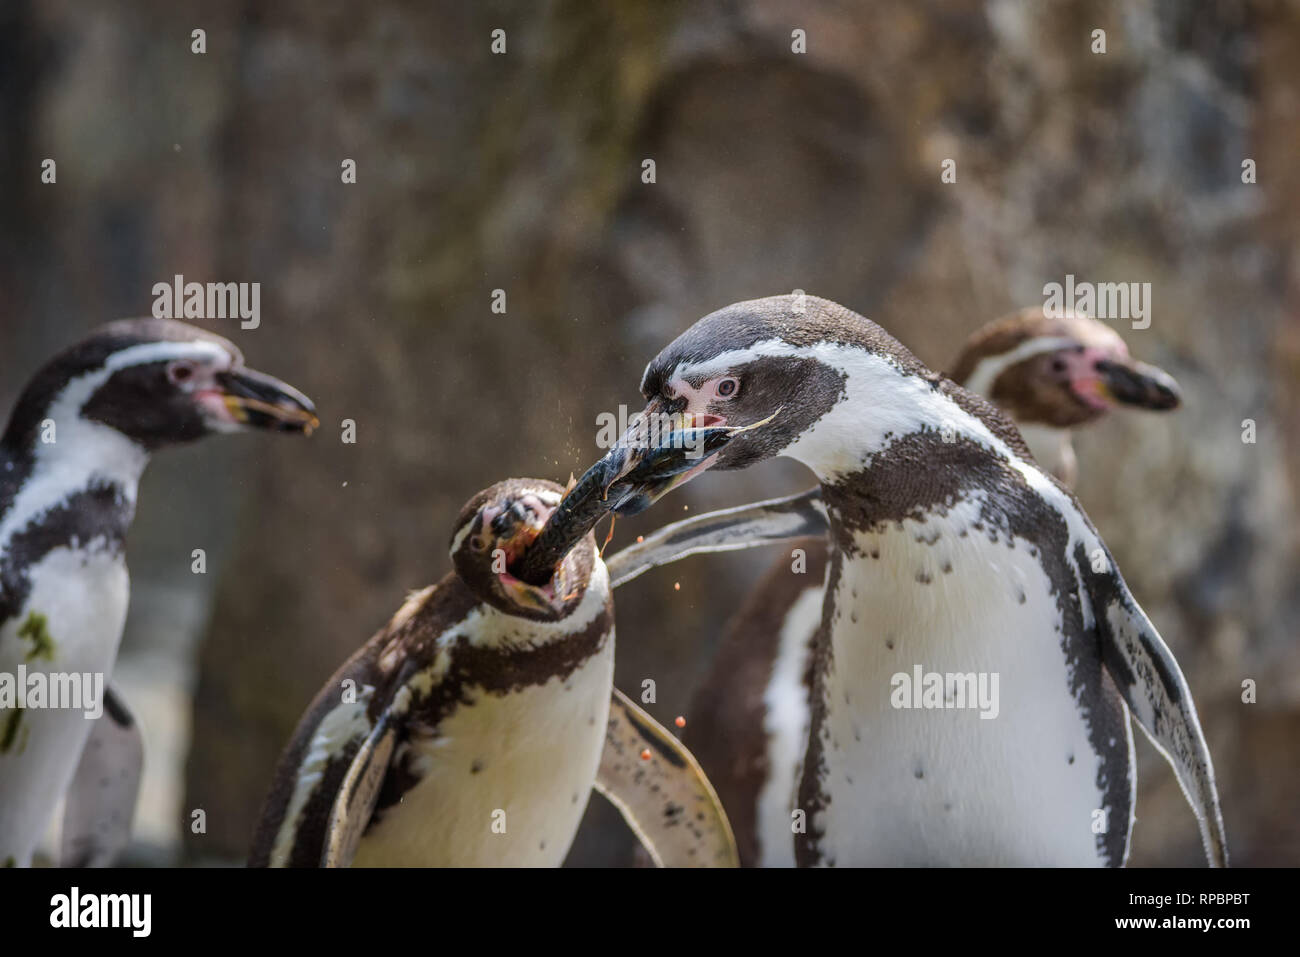 Two Humboldt penguins fight for a fish Stock Photo